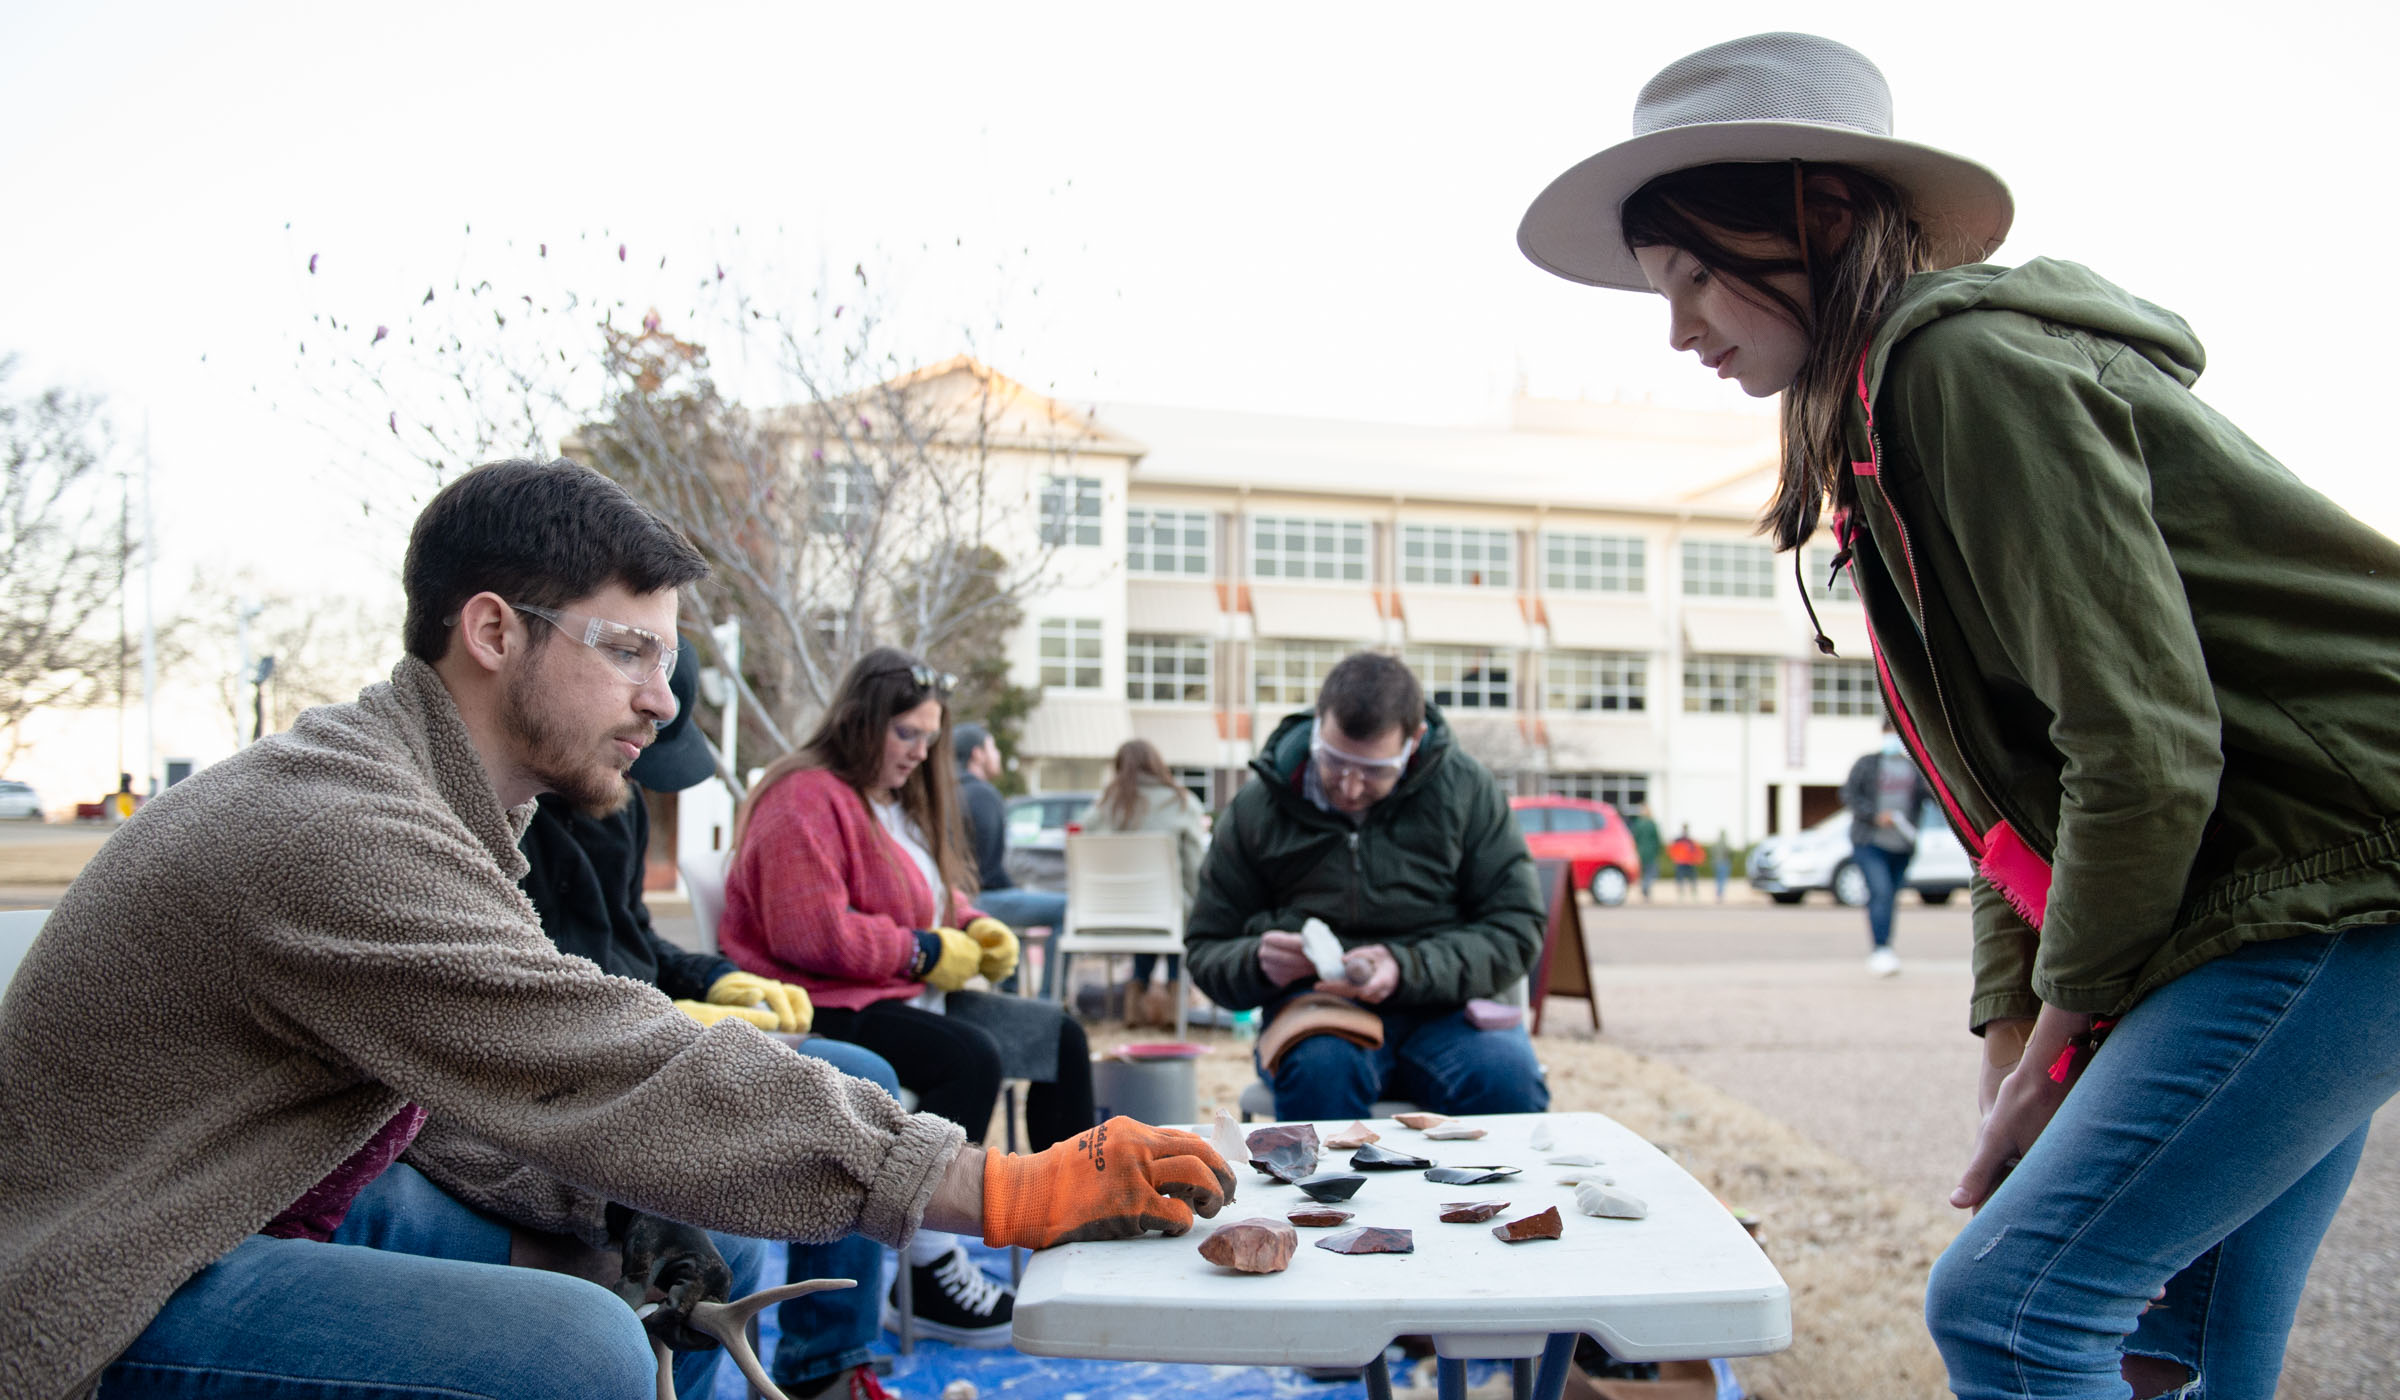 An Anthropology graduate student wearing safely glasses pauses in his work on antlers to discuss the flint and obsidian samples on a table with a hat-wearing girl visitor.